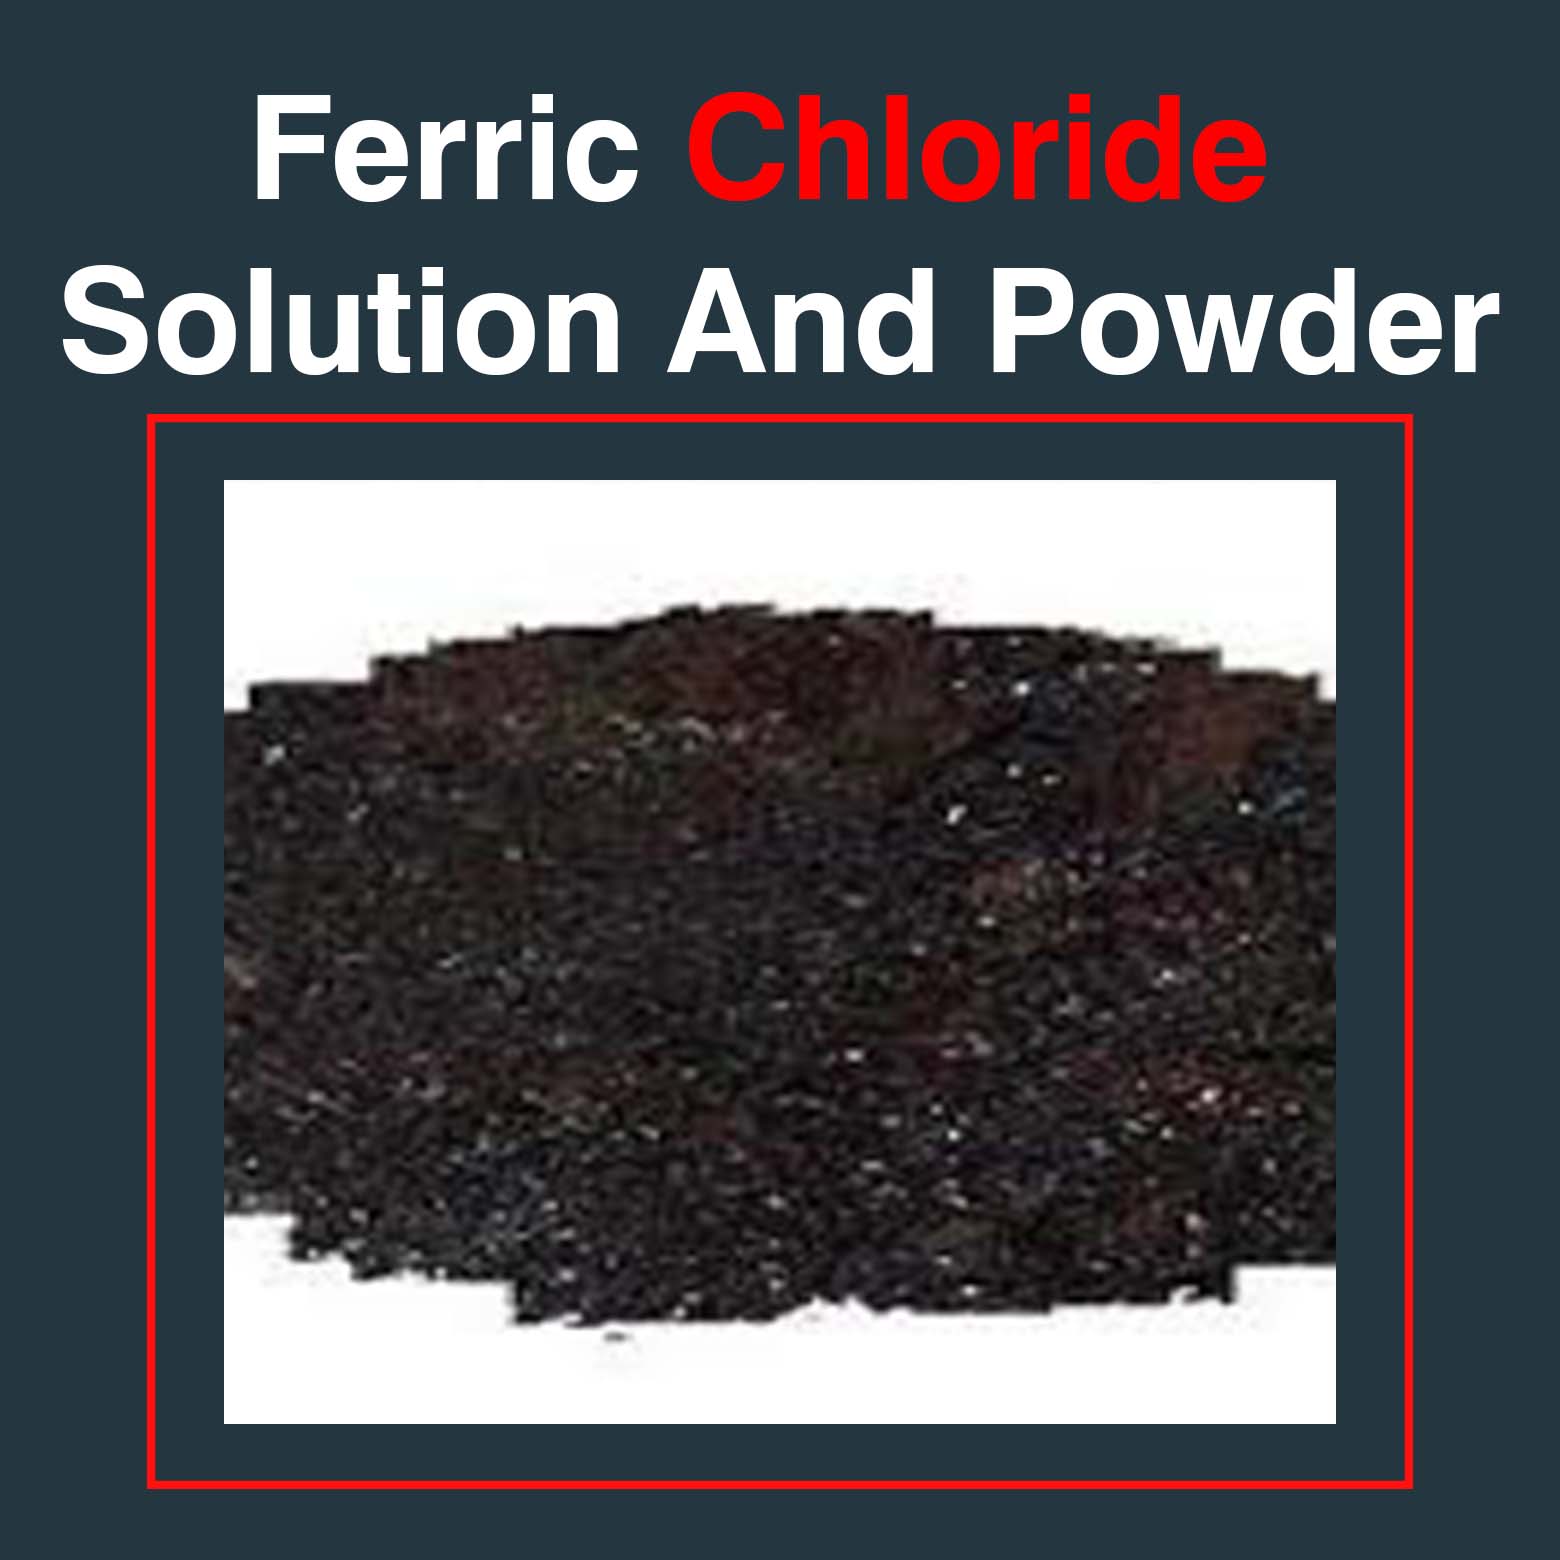 Ferric Chloride Solution And Powder In Senegal